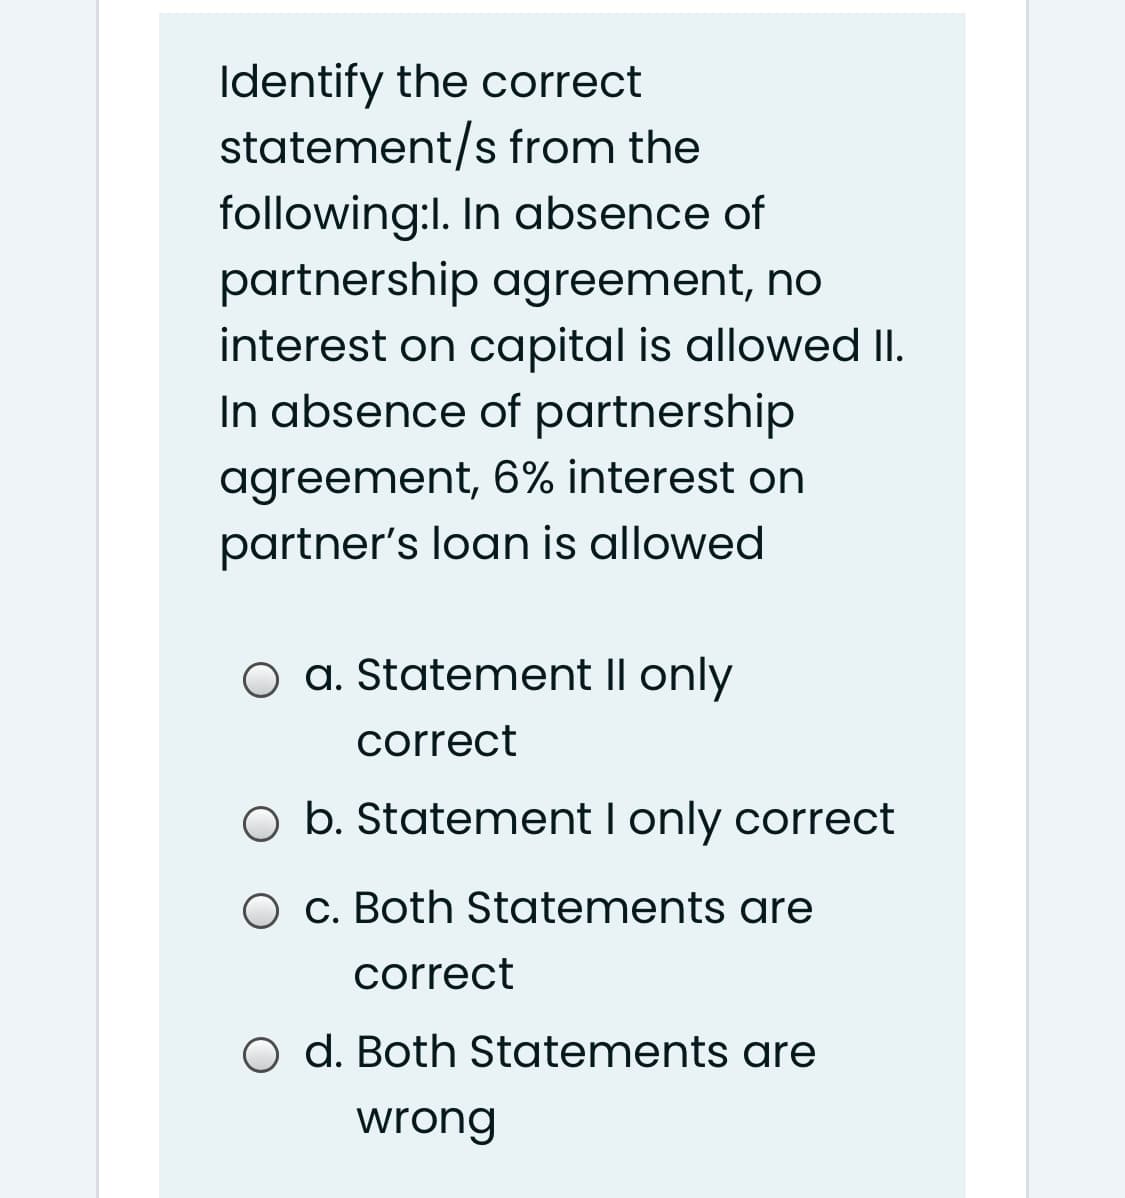 Identify the correct
statement/s from the
following:I. In absence of
partnership agreement, no
interest on capital is allowed II.
In absence of partnership
agreement, 6% interest on
partner's loan is allowed
O a. Statement II only
correct
O b. Statement I only correct
O c. Both Statements are
correct
O d. Both Statements are
wrong
